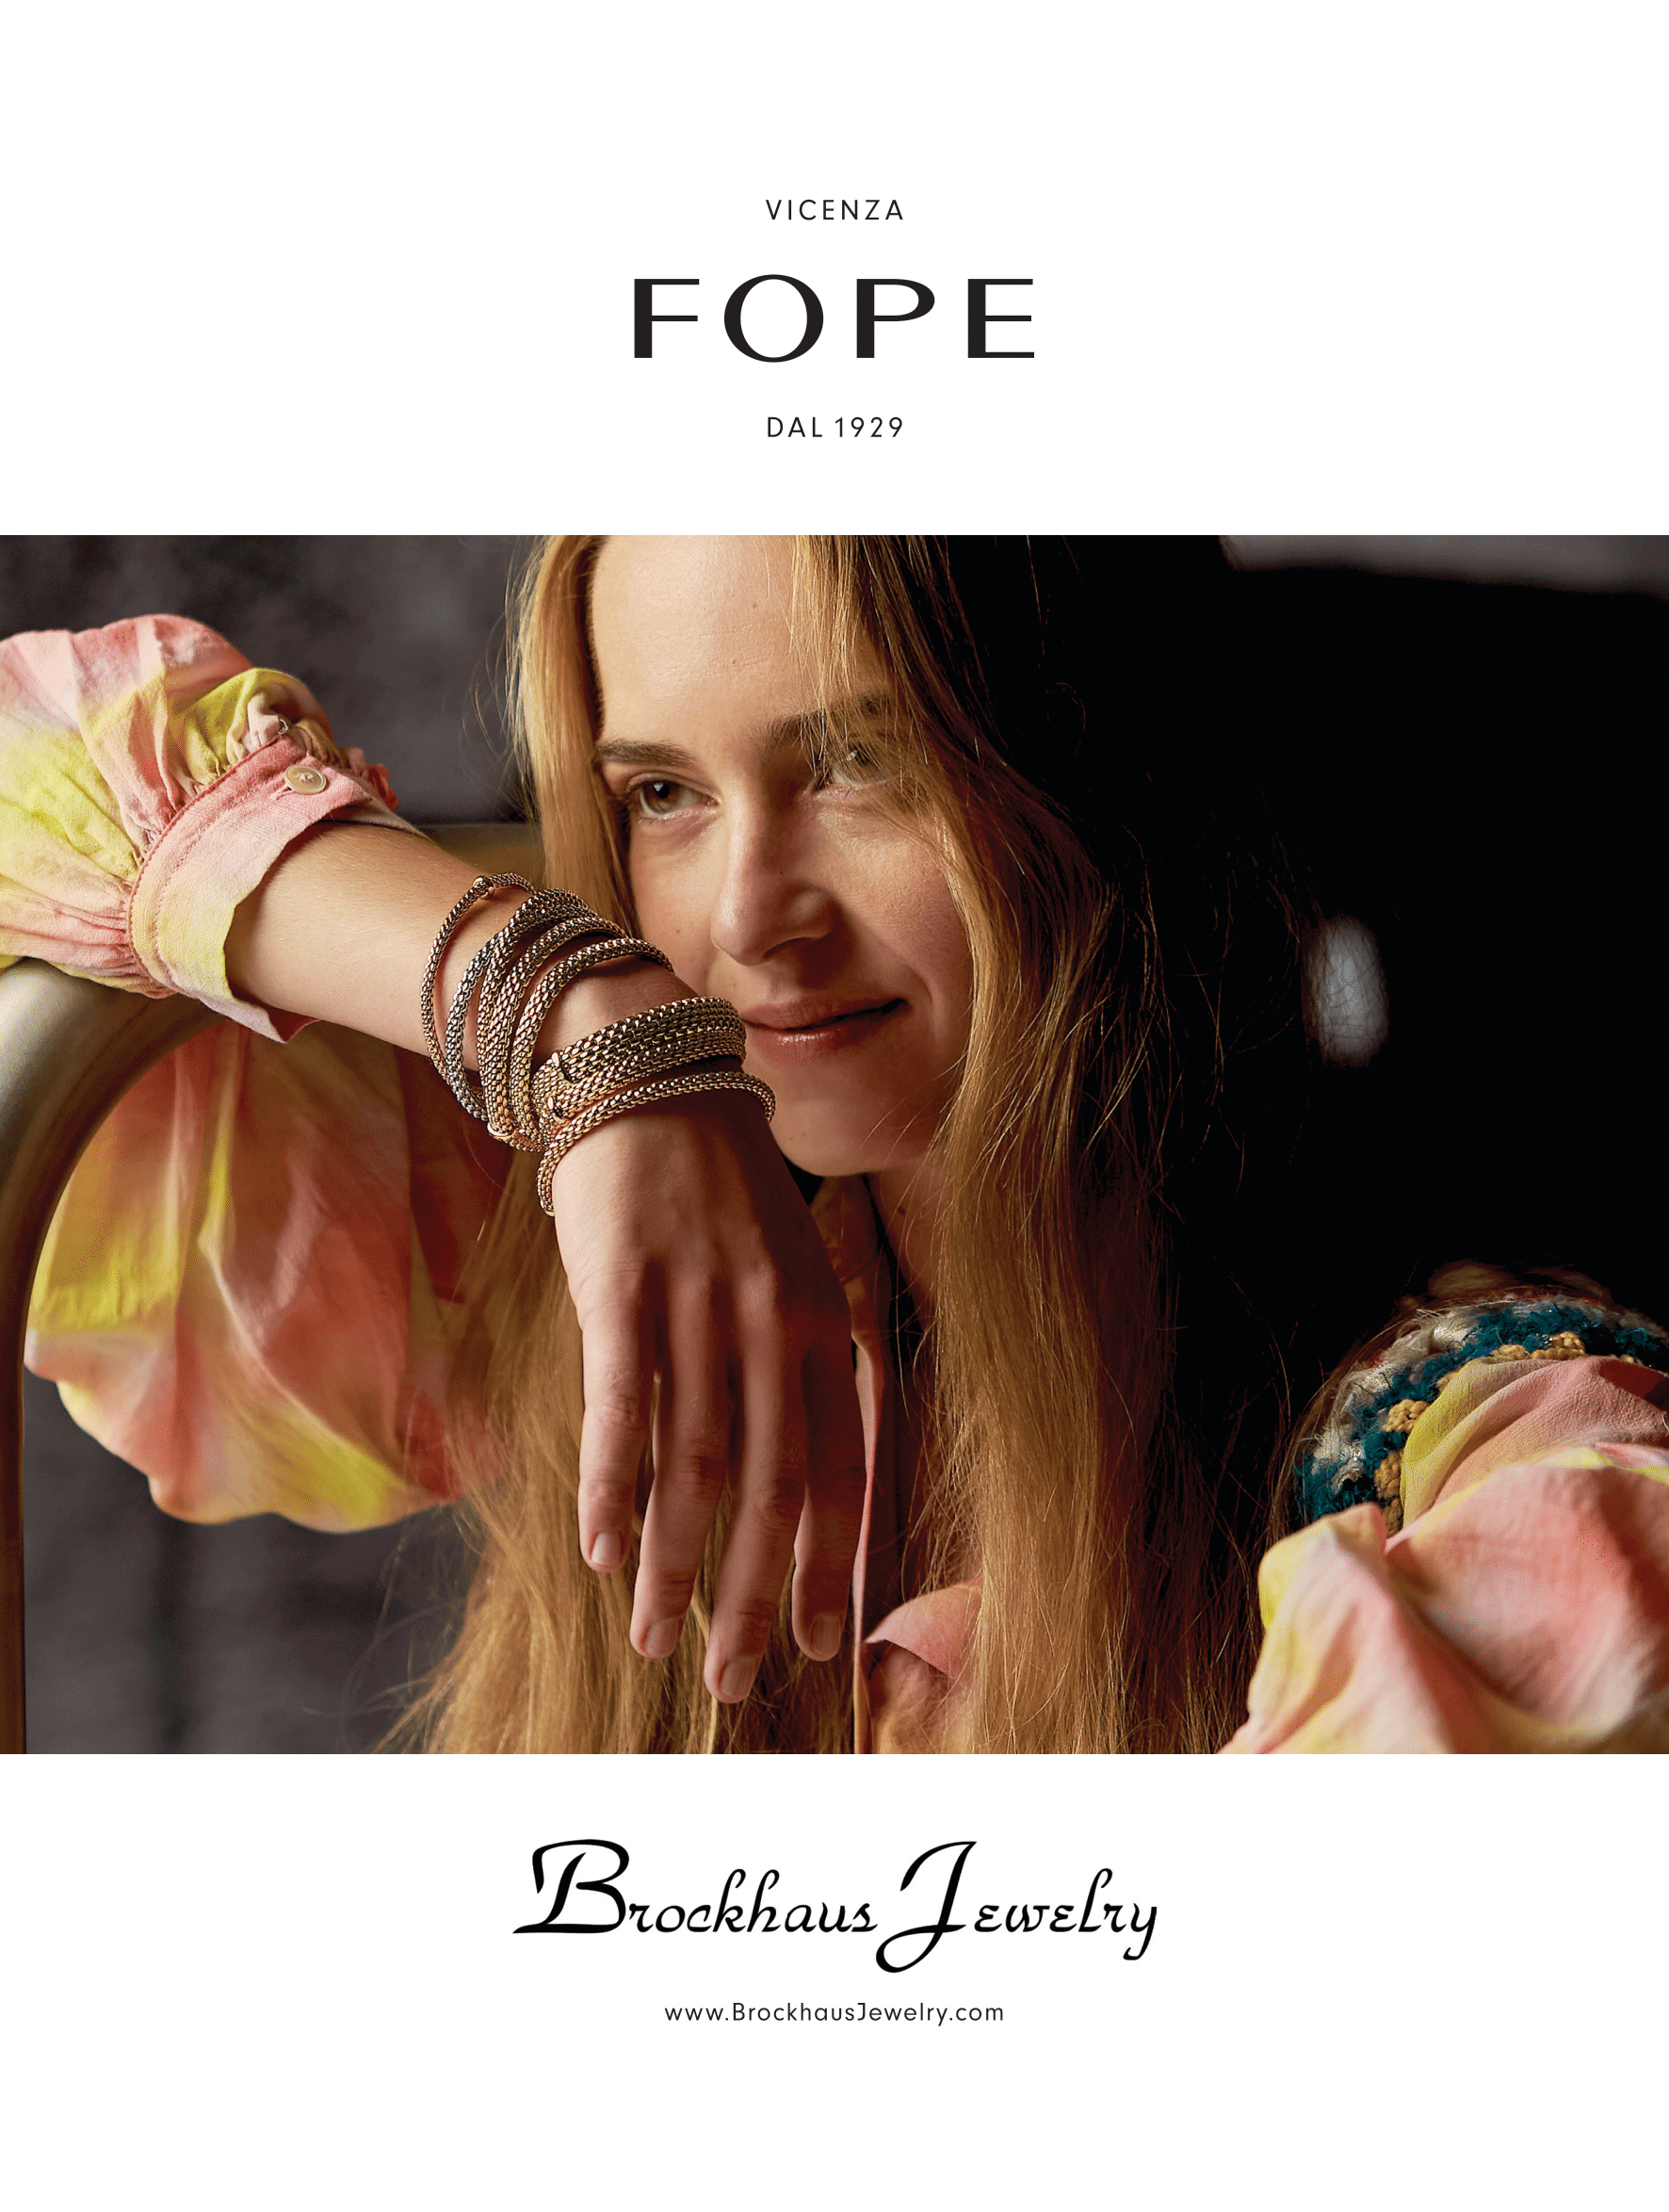 Brockhaus Jewelry ad in Vogue featuring FOPE